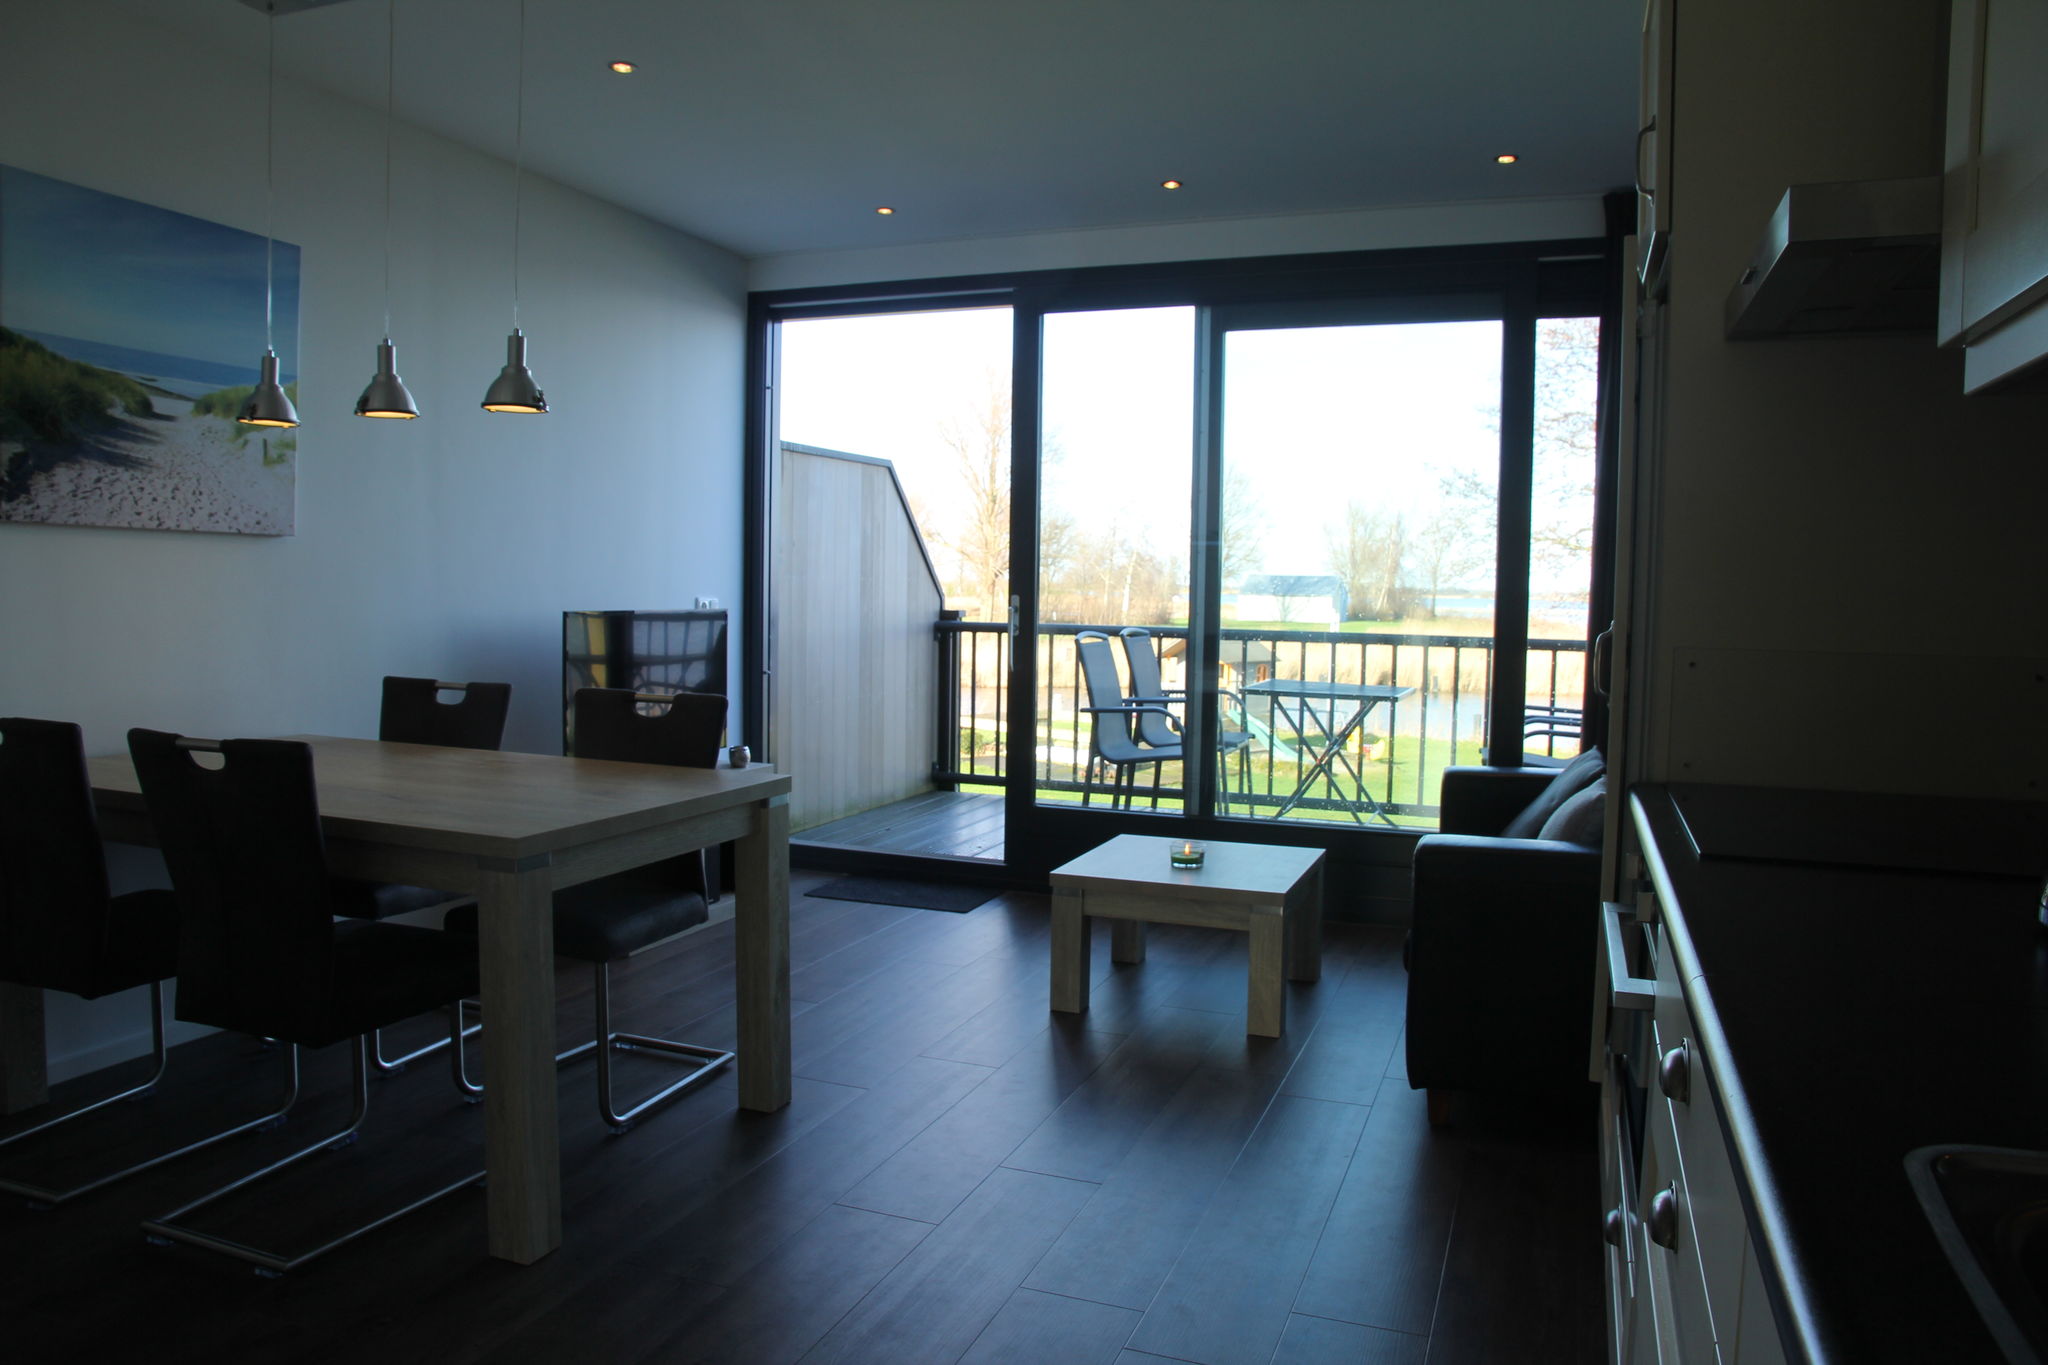 Charming Apartment in Langweer with Jetty